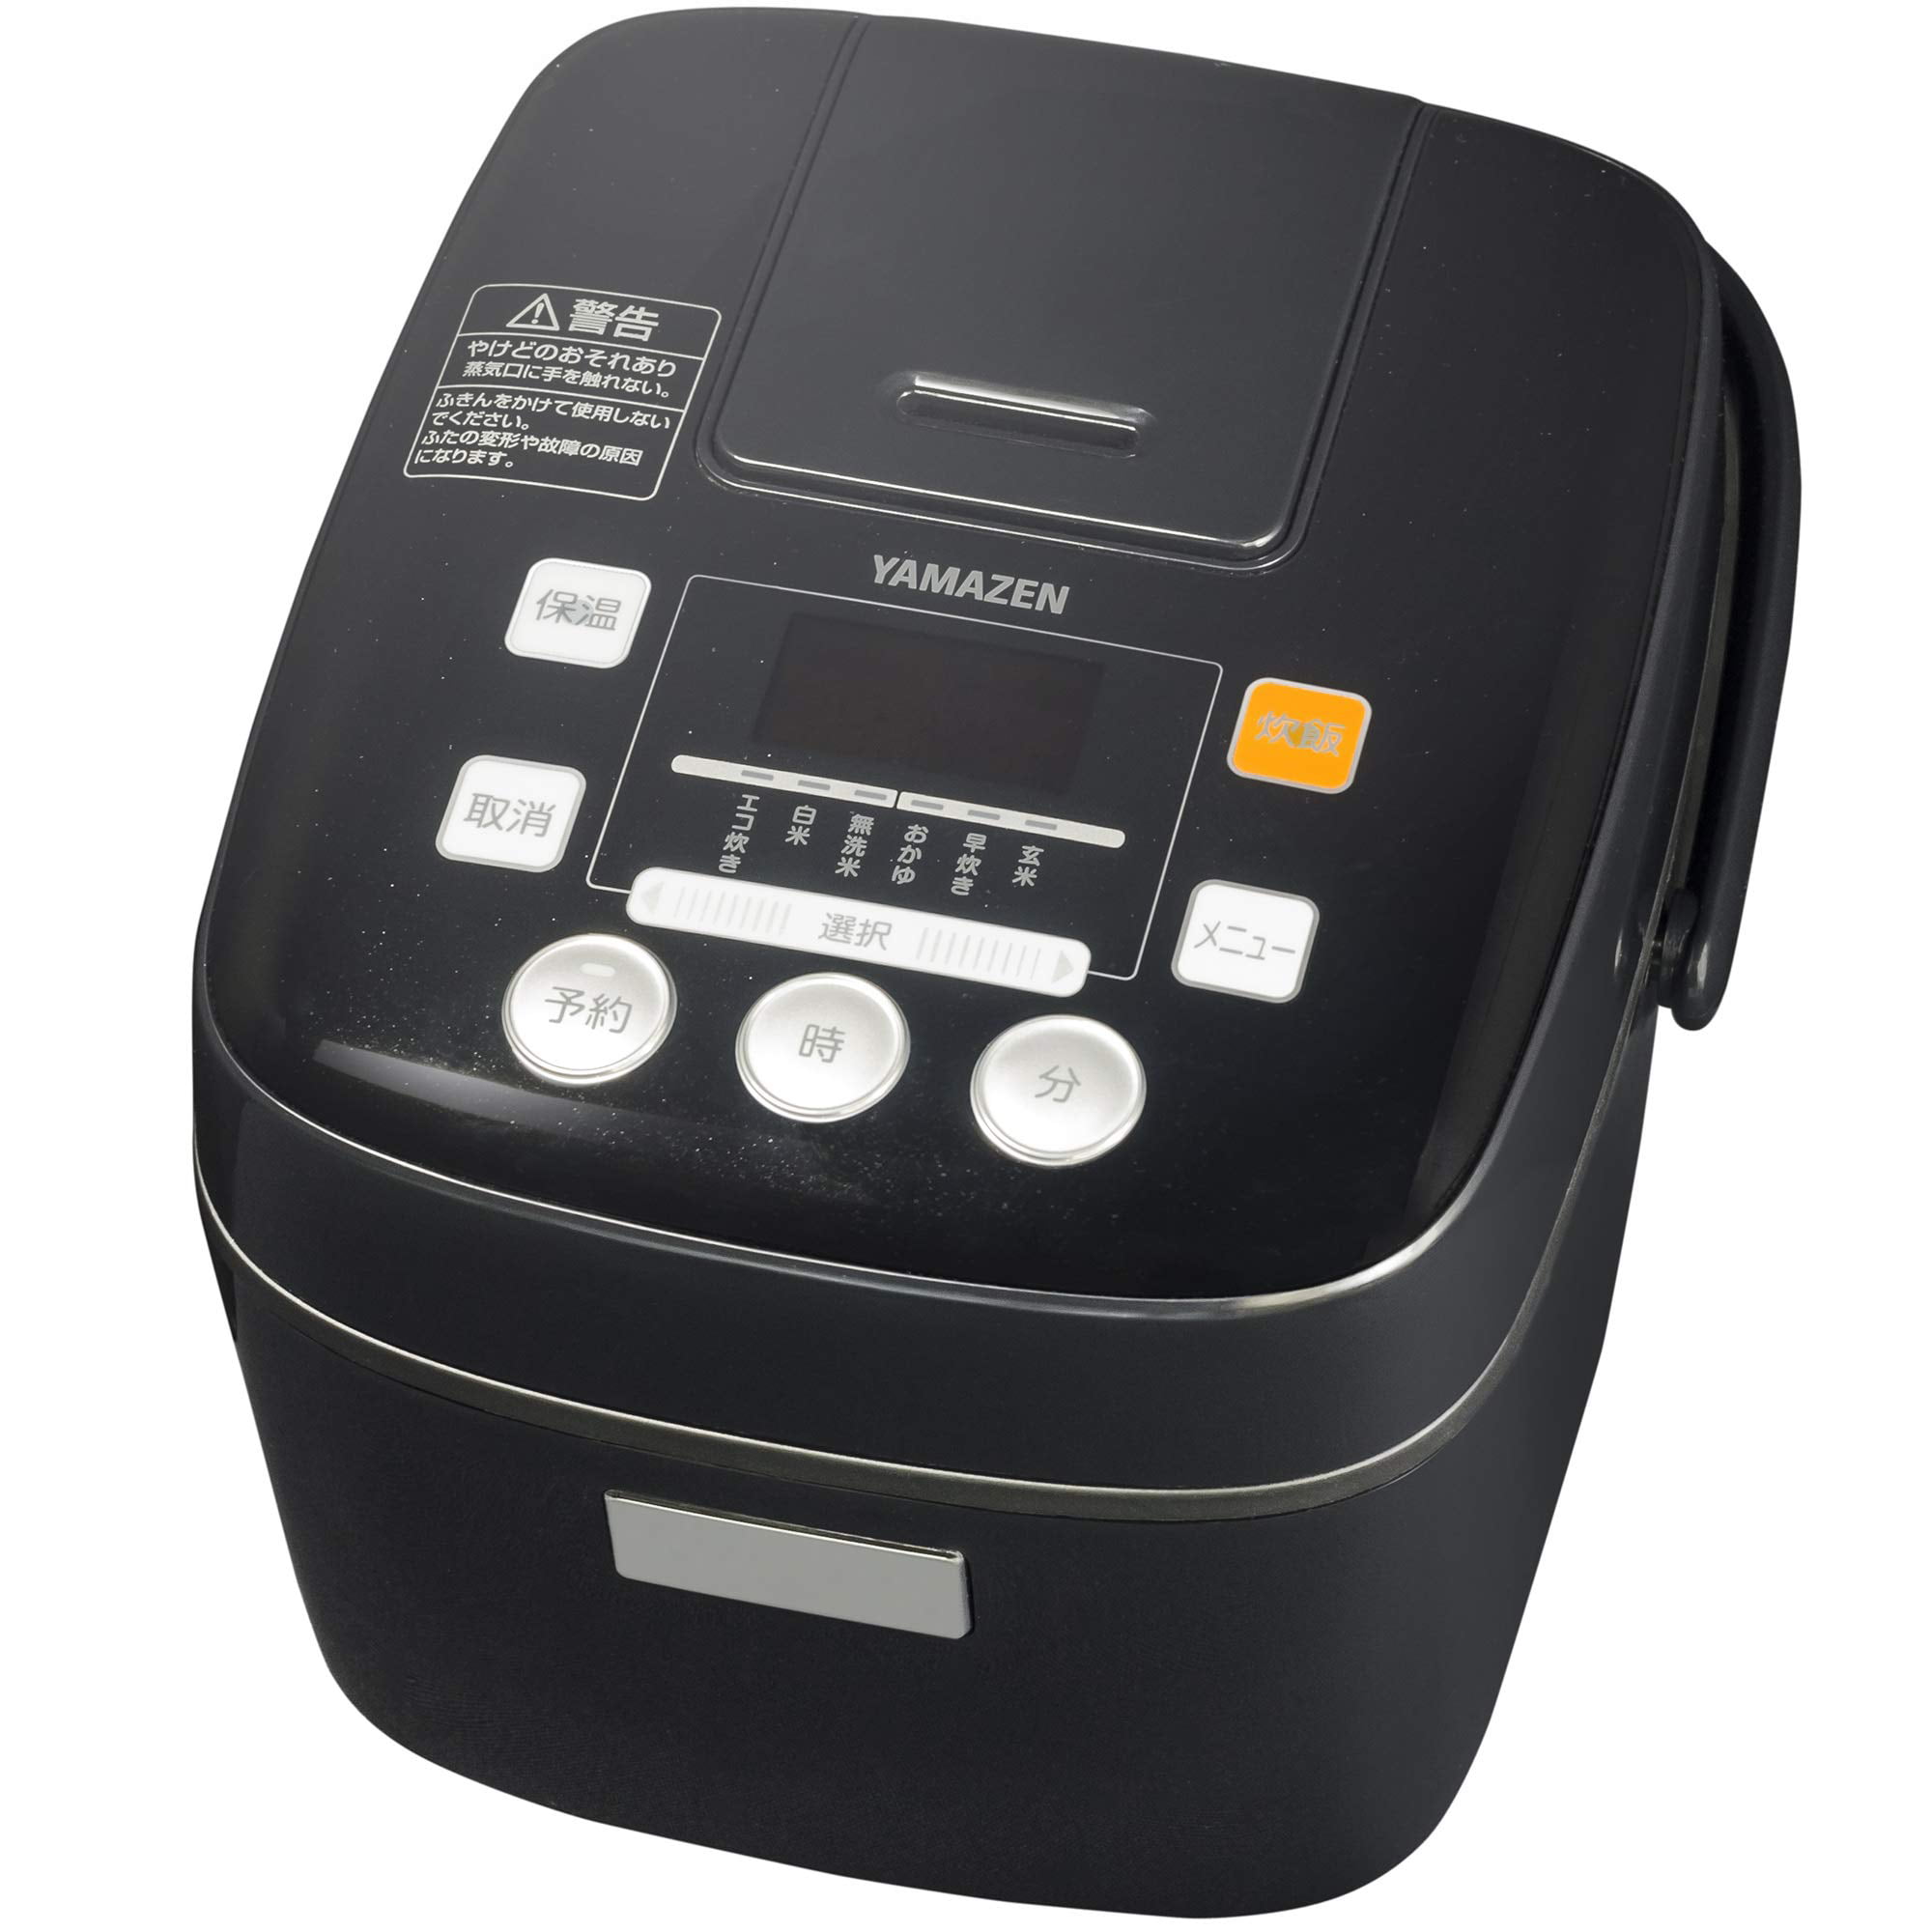 Yamazen] rice cooker 3 go Microcomputer type 6 types of separate